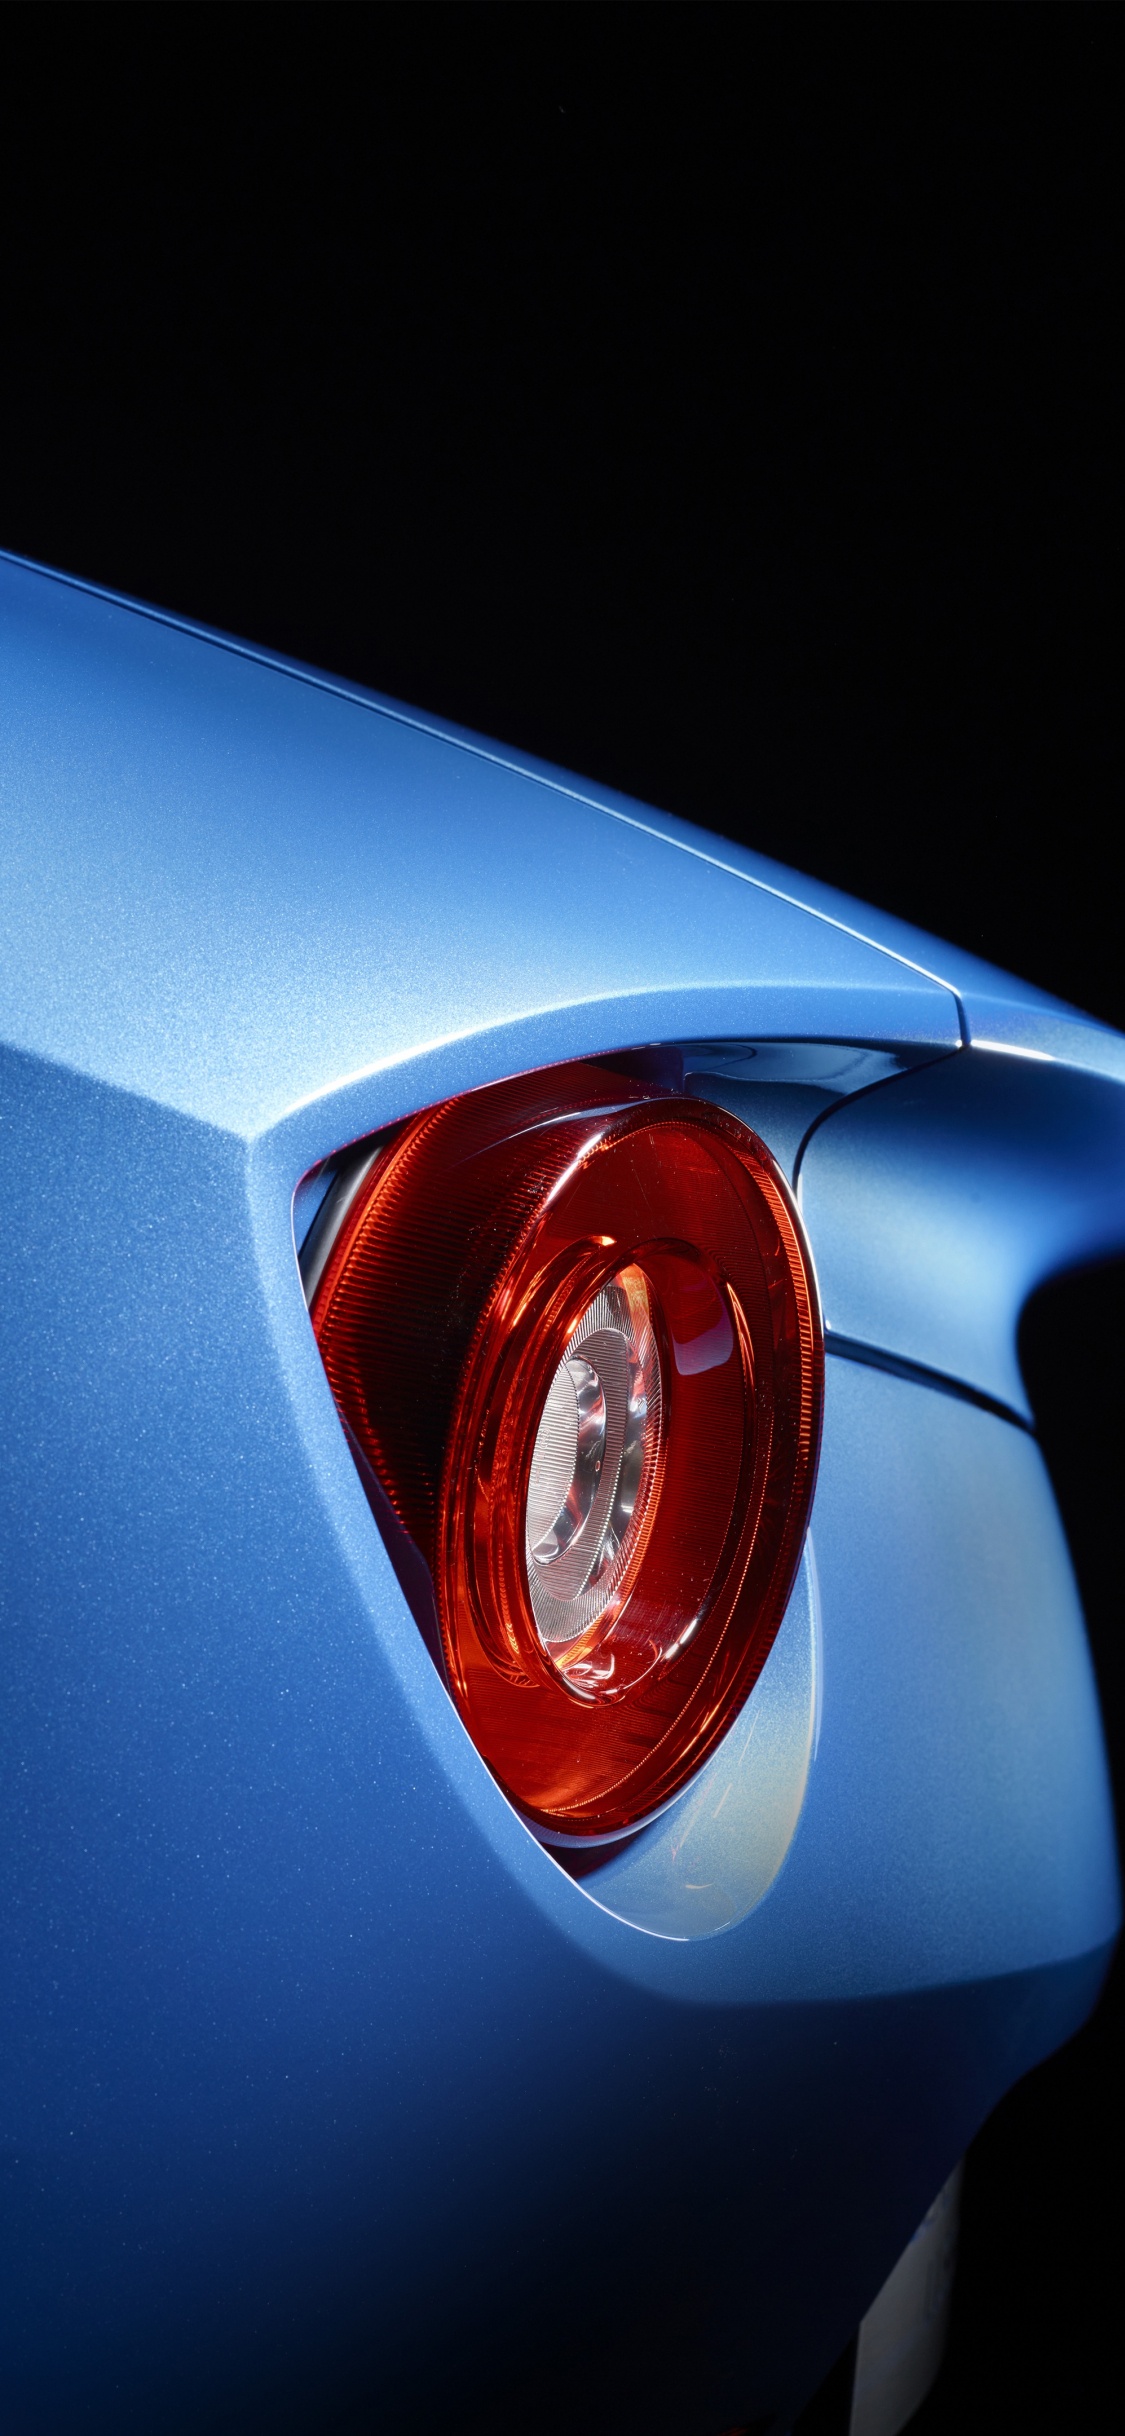 Blue Car With Red Light. Wallpaper in 1125x2436 Resolution